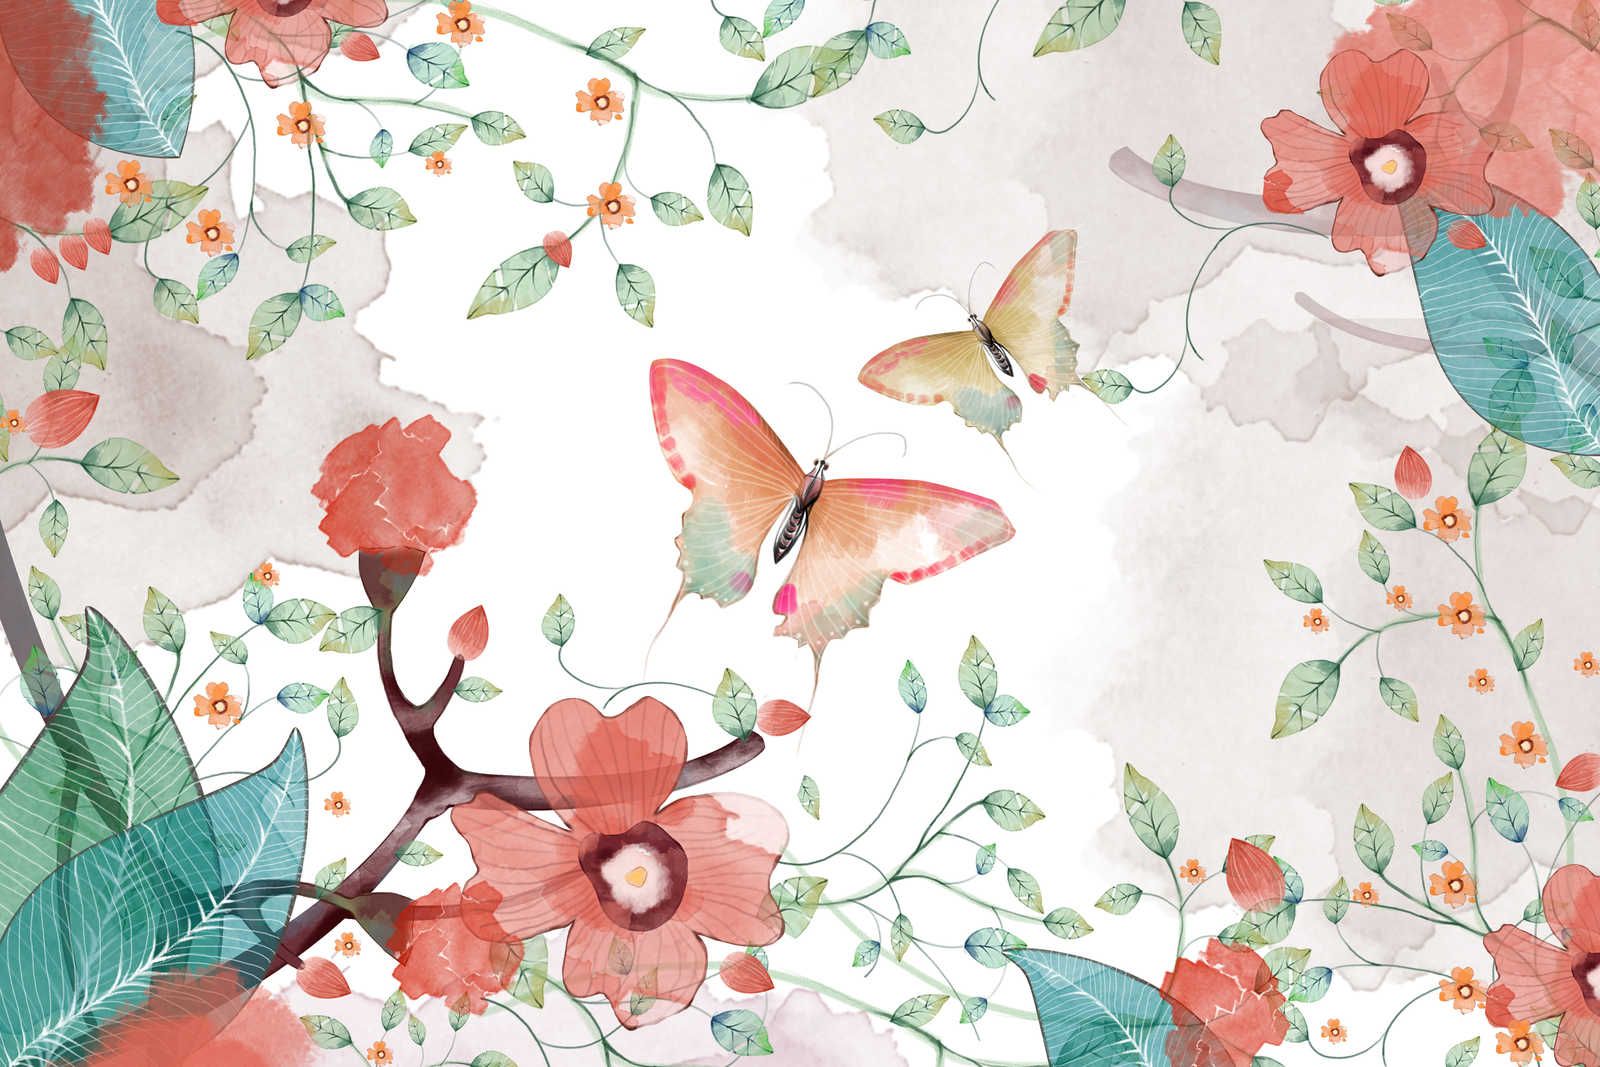             Canvas floral with leaves and butterflies - 90 cm x 60 cm
        